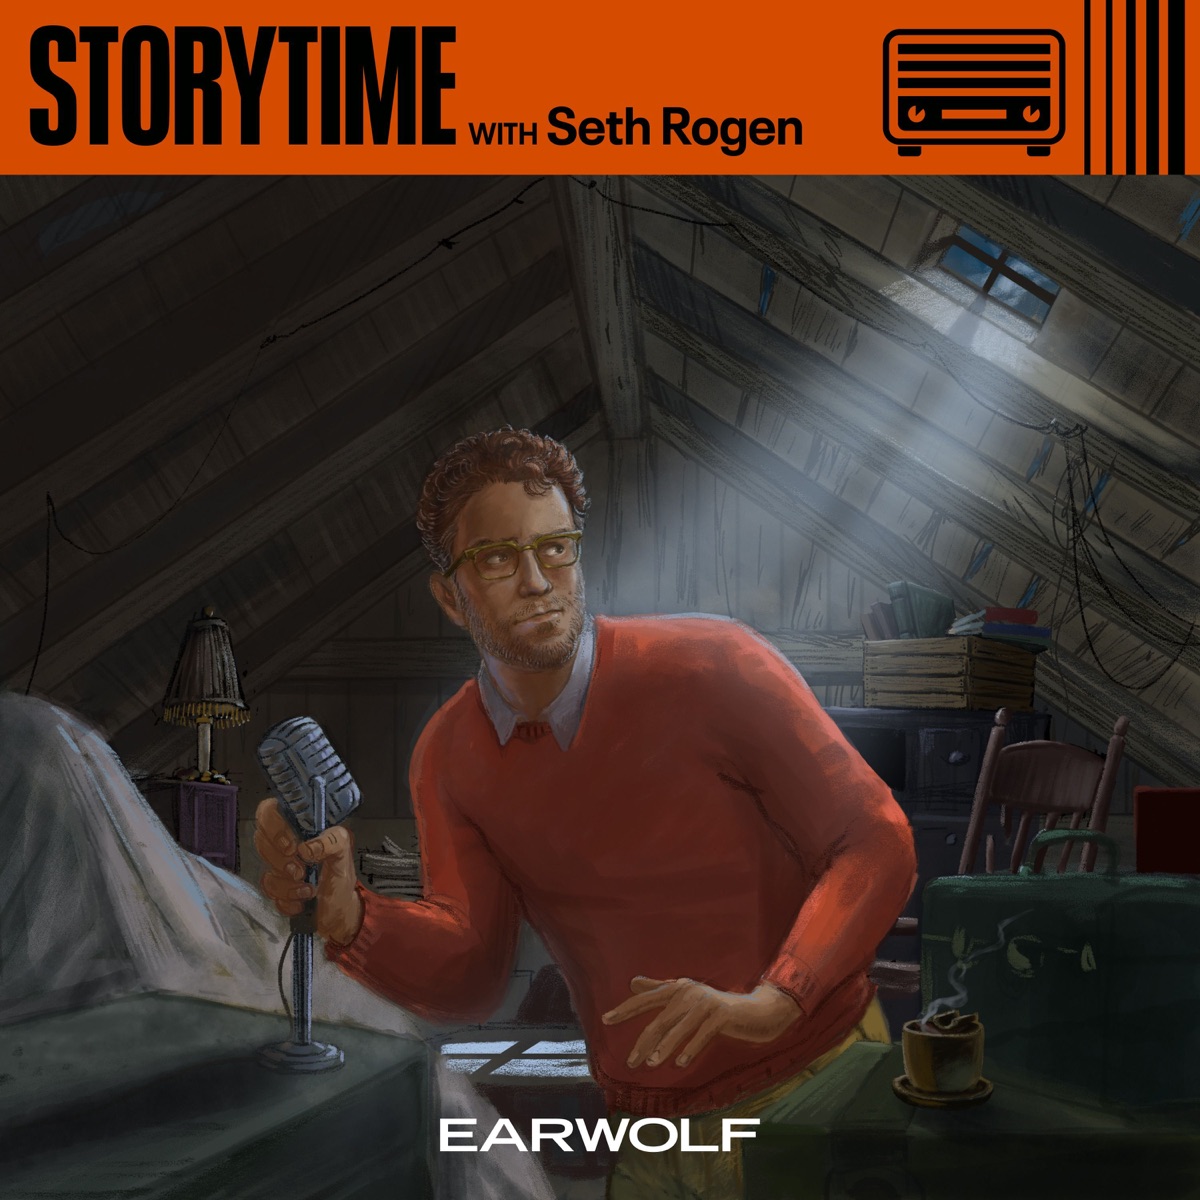 Coming Soon: Storytime with Seth Rogen